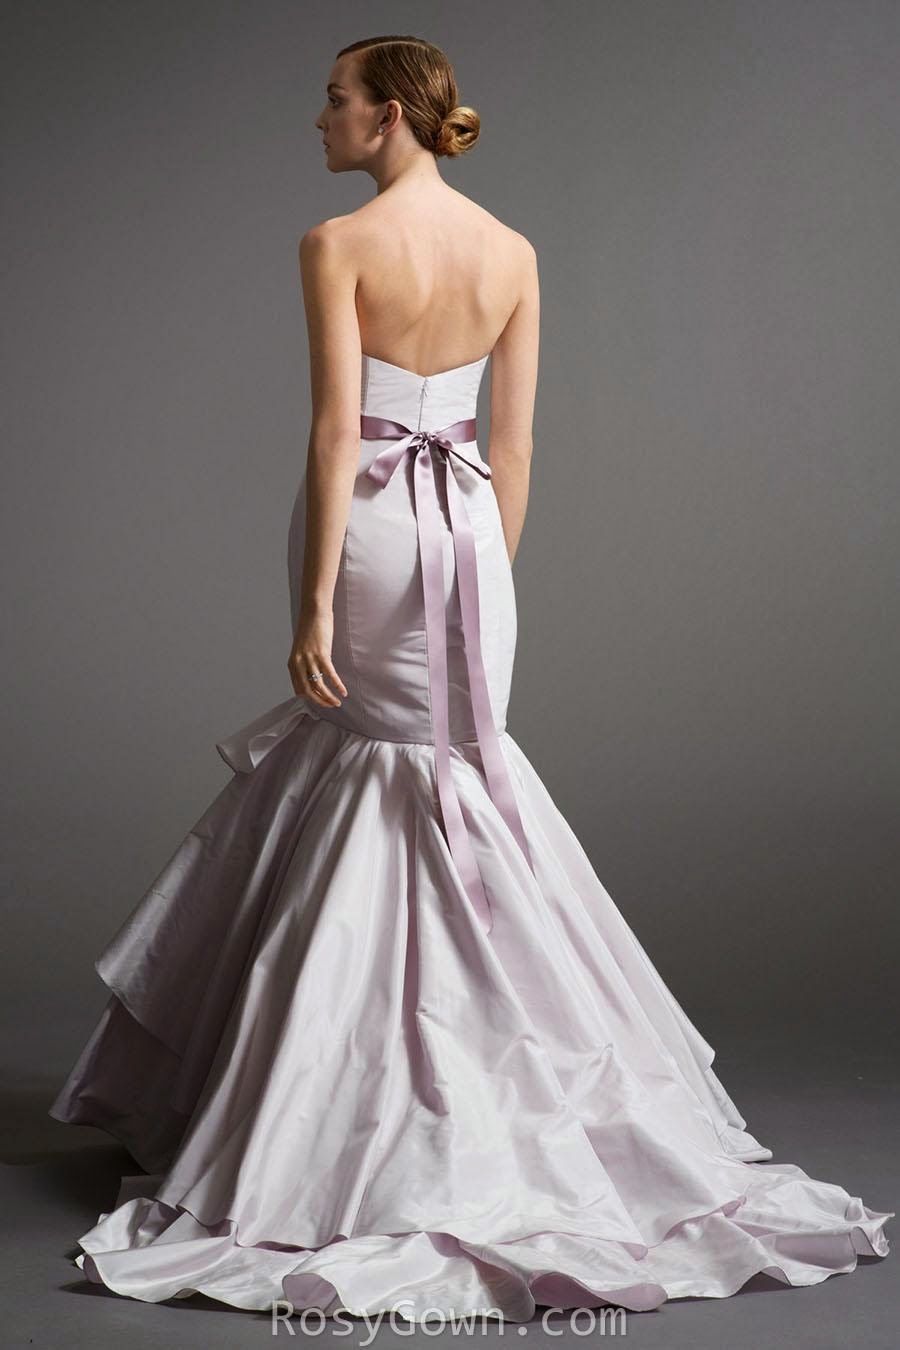 Strapless Romantic Lavender Taffeta Tiered Fit and Flare Bridal Gown-2